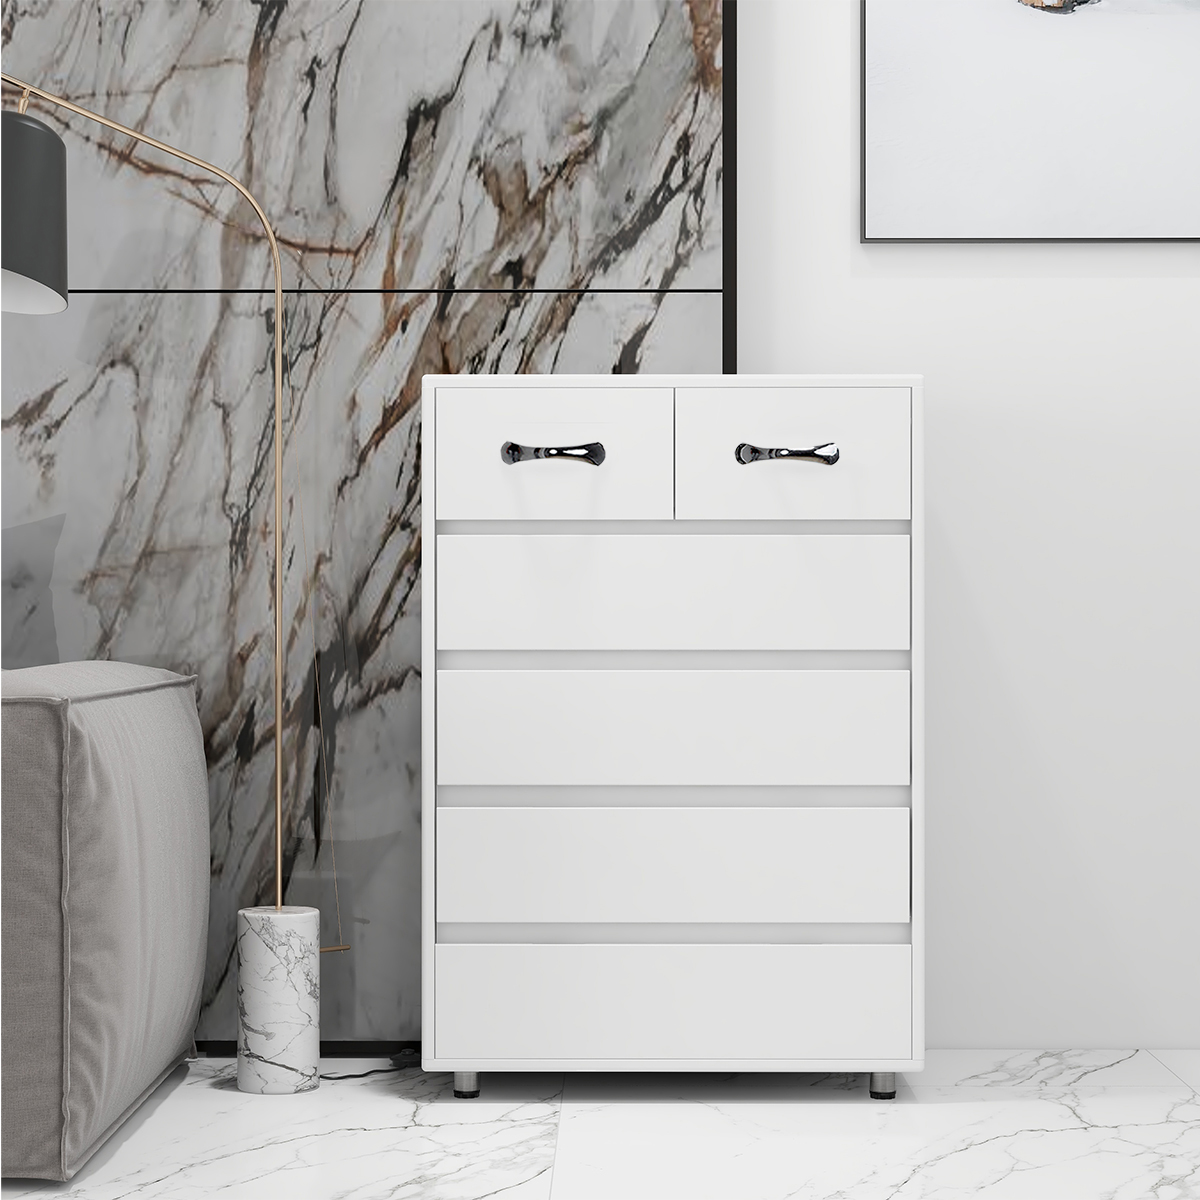 6 Drawer Dresser, URHOMEPRO Chest of Drawers Storage Organizer Nightstand, Wood Frame Drawer Chest with Steel Tube Legs, Bathroom Floor Cabinet, Living Room Office Bedroom Furniture, White, W12868 - image 1 of 10